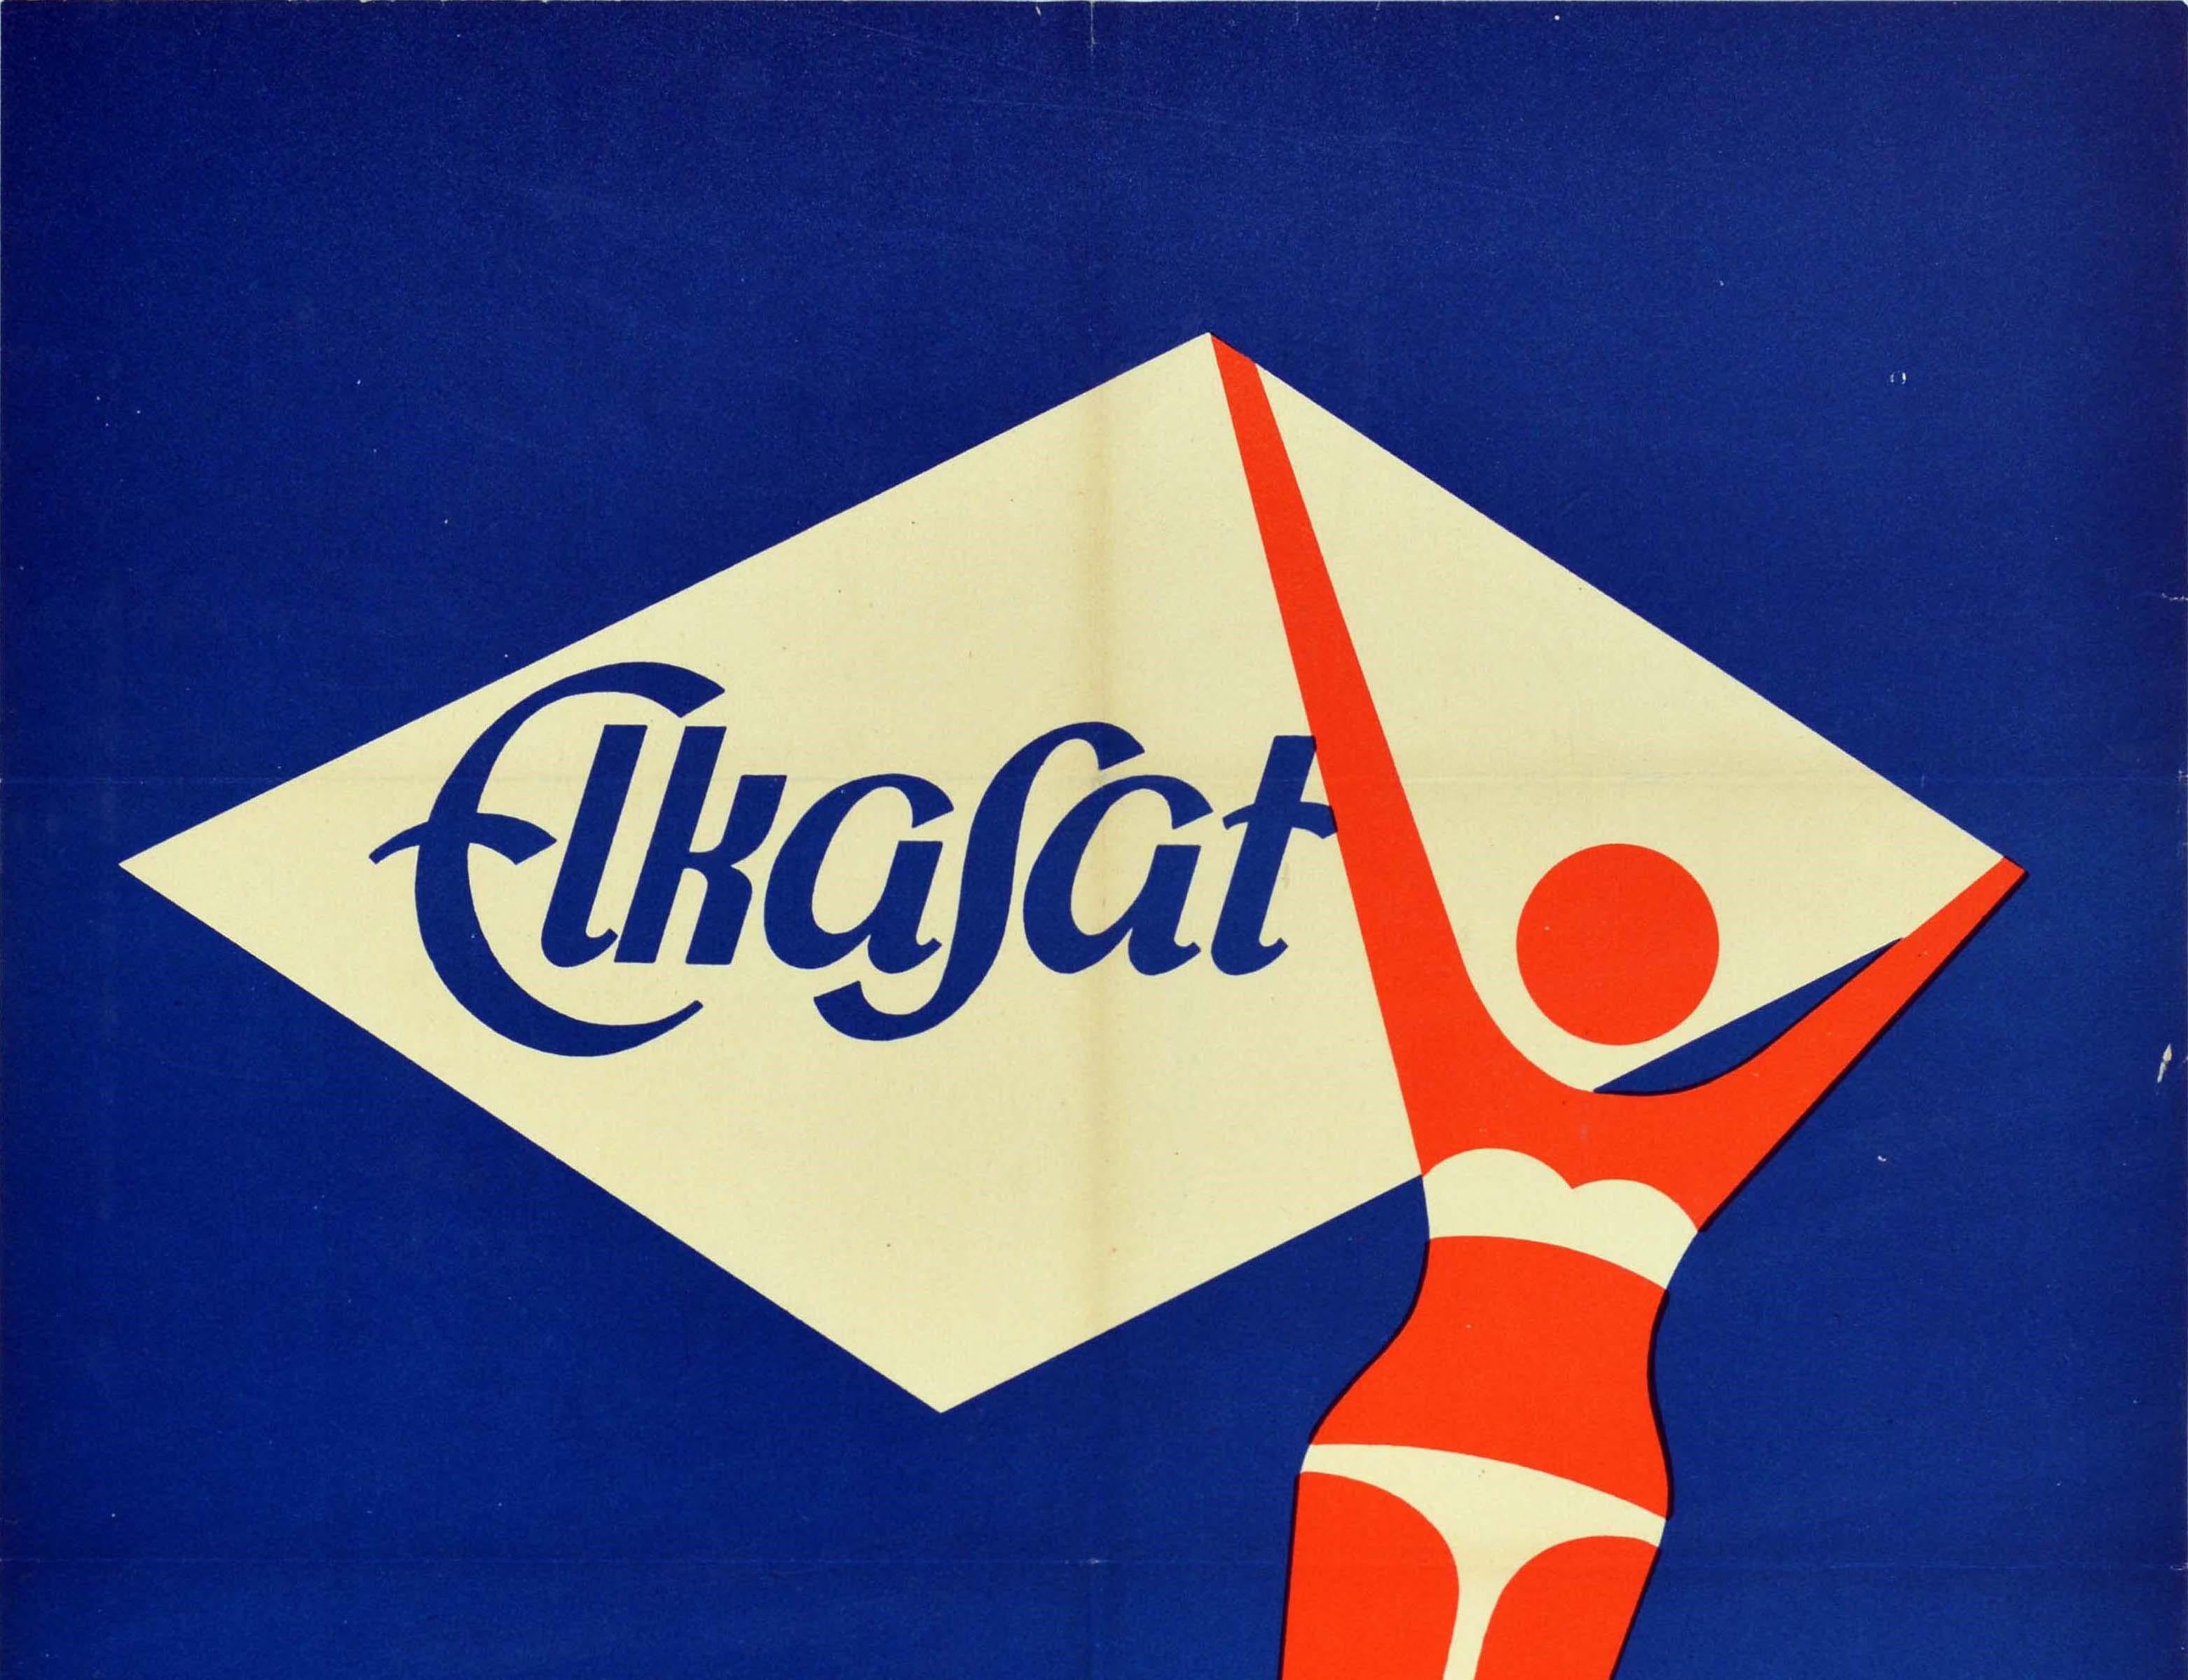 Original vintage advertising poster for Elkasat sun cream lotion for sunbathing / zum Sonnenbad - Ultra with silicon No laundry staining So easy to use - featuring a great graphic design showing a stylised image of a lady in a white bikini standing